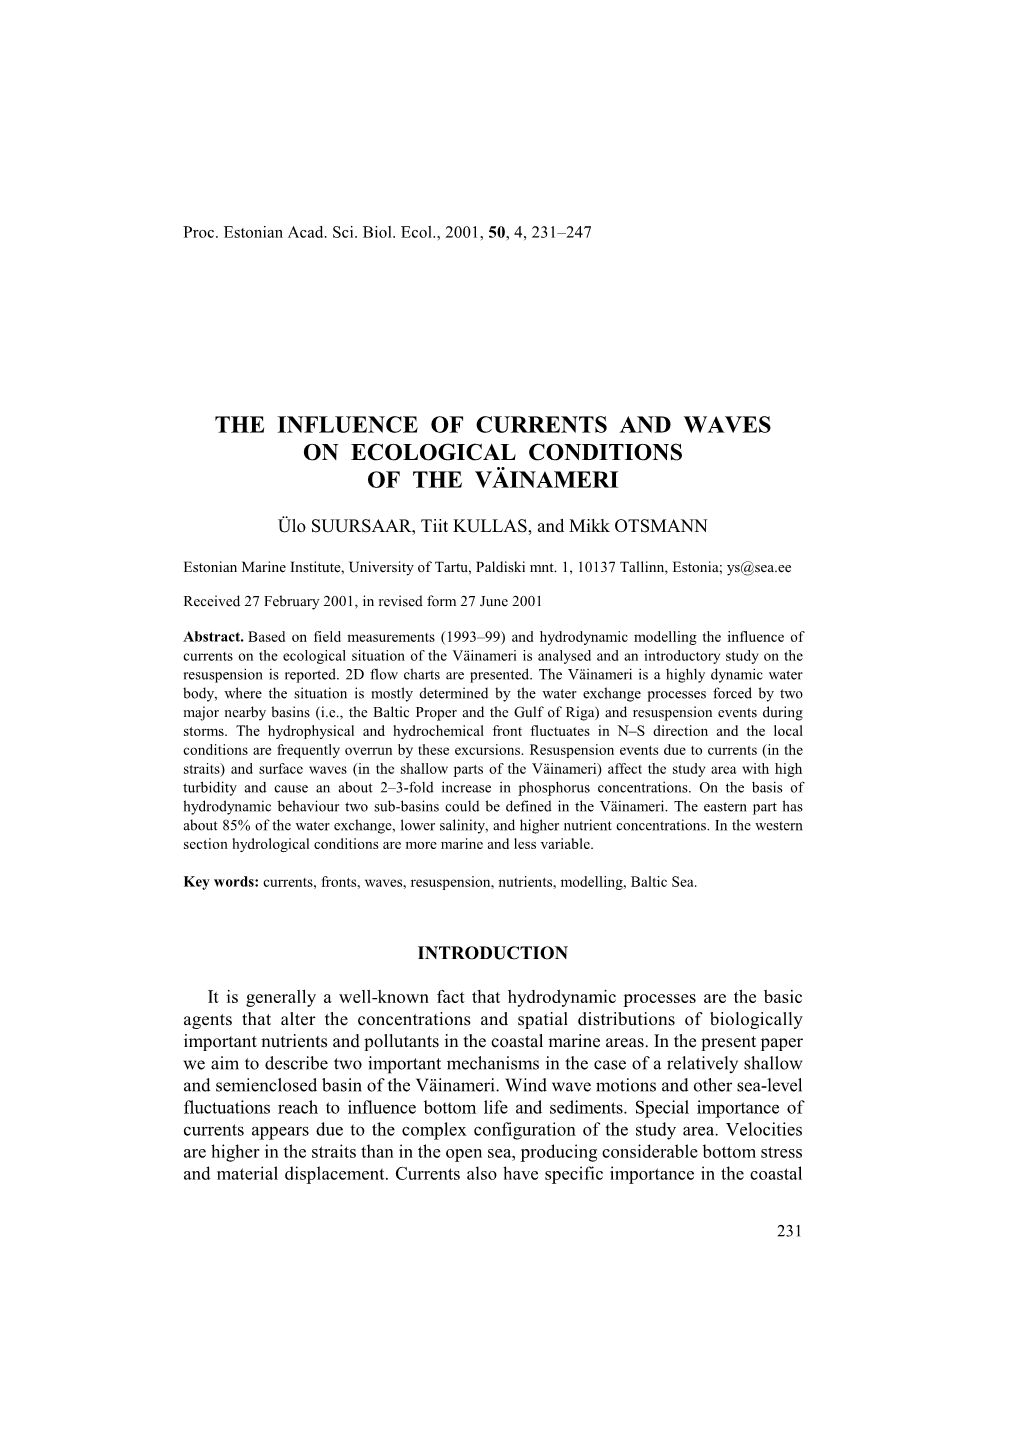 The Influence of Currents and Waves on Ecological Conditions of the Väinameri